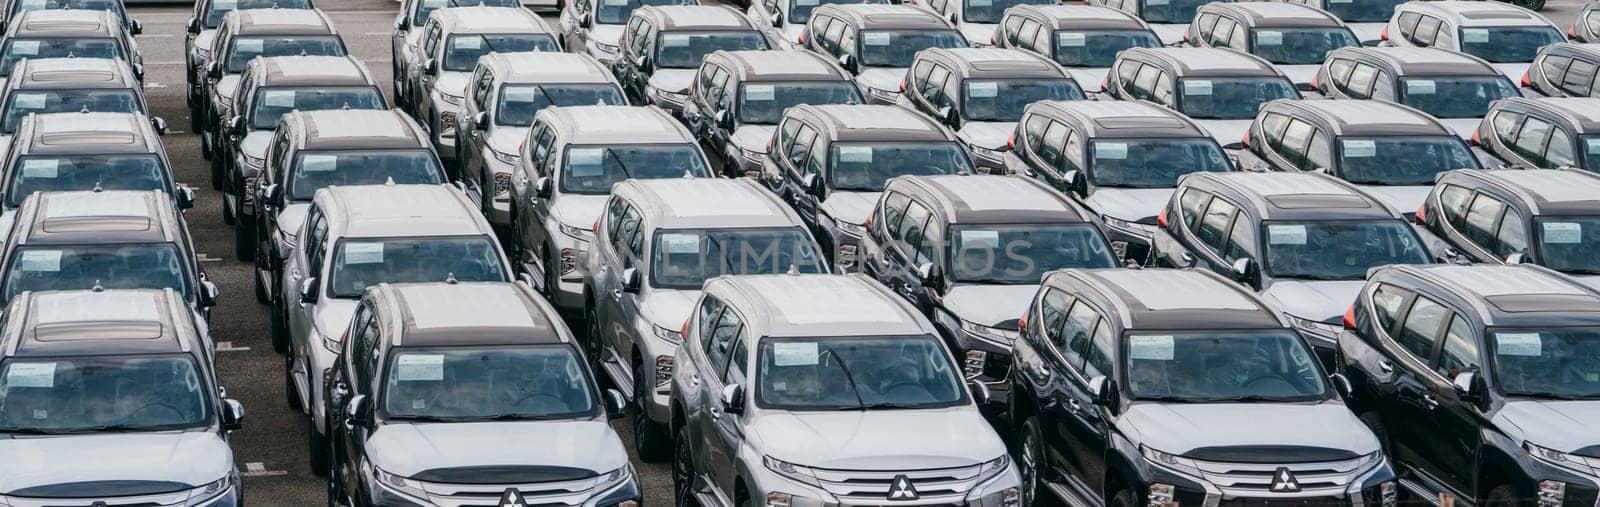 Lamchabang, Thailand - July 02, 2023 In a bustling factory garage, new cars are prepared for parking and transportationa reflection of modern automotive industry and technology.